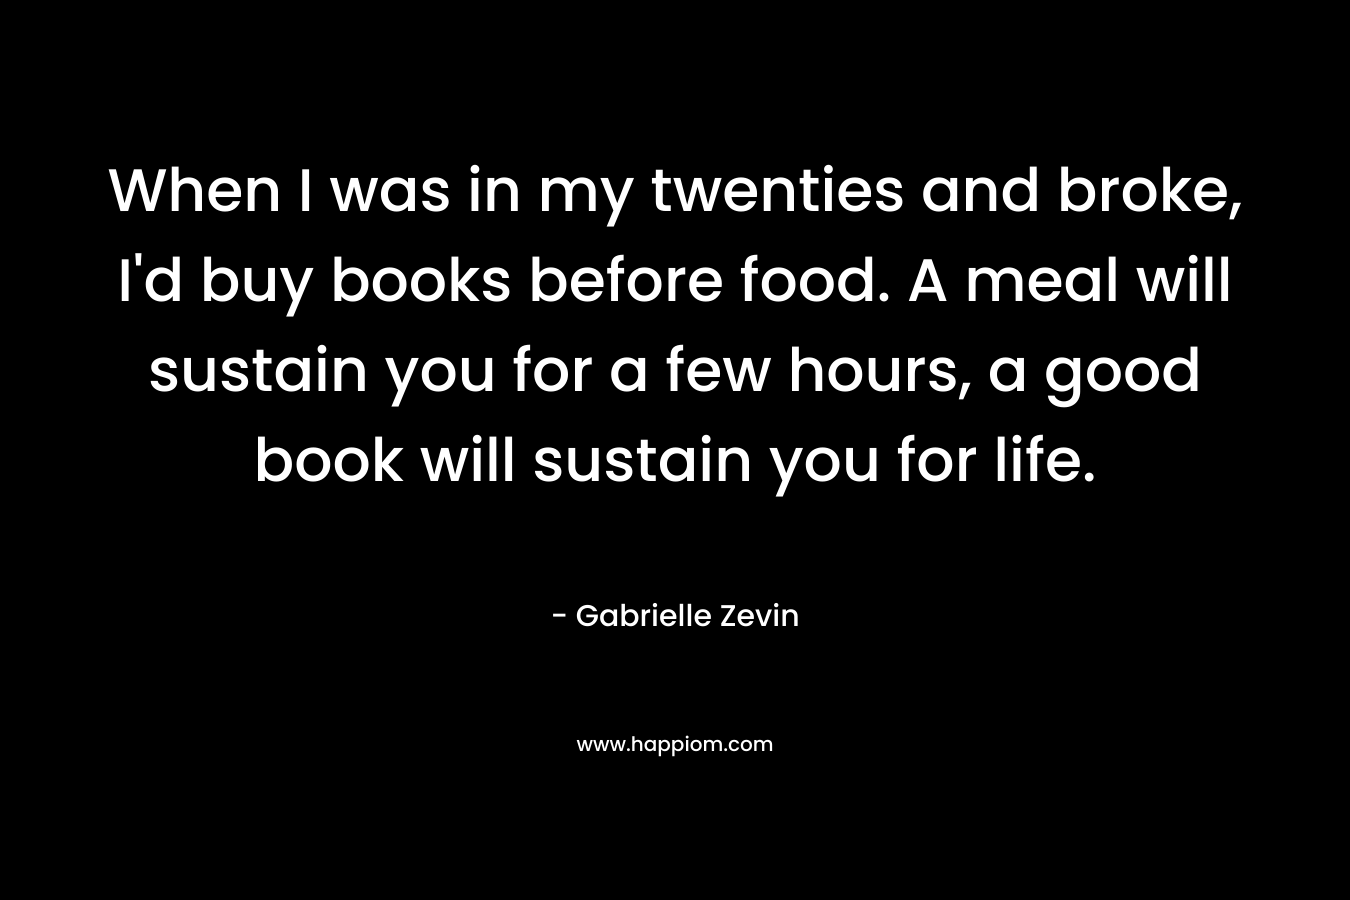 When I was in my twenties and broke, I'd buy books before food. A meal will sustain you for a few hours, a good book will sustain you for life.